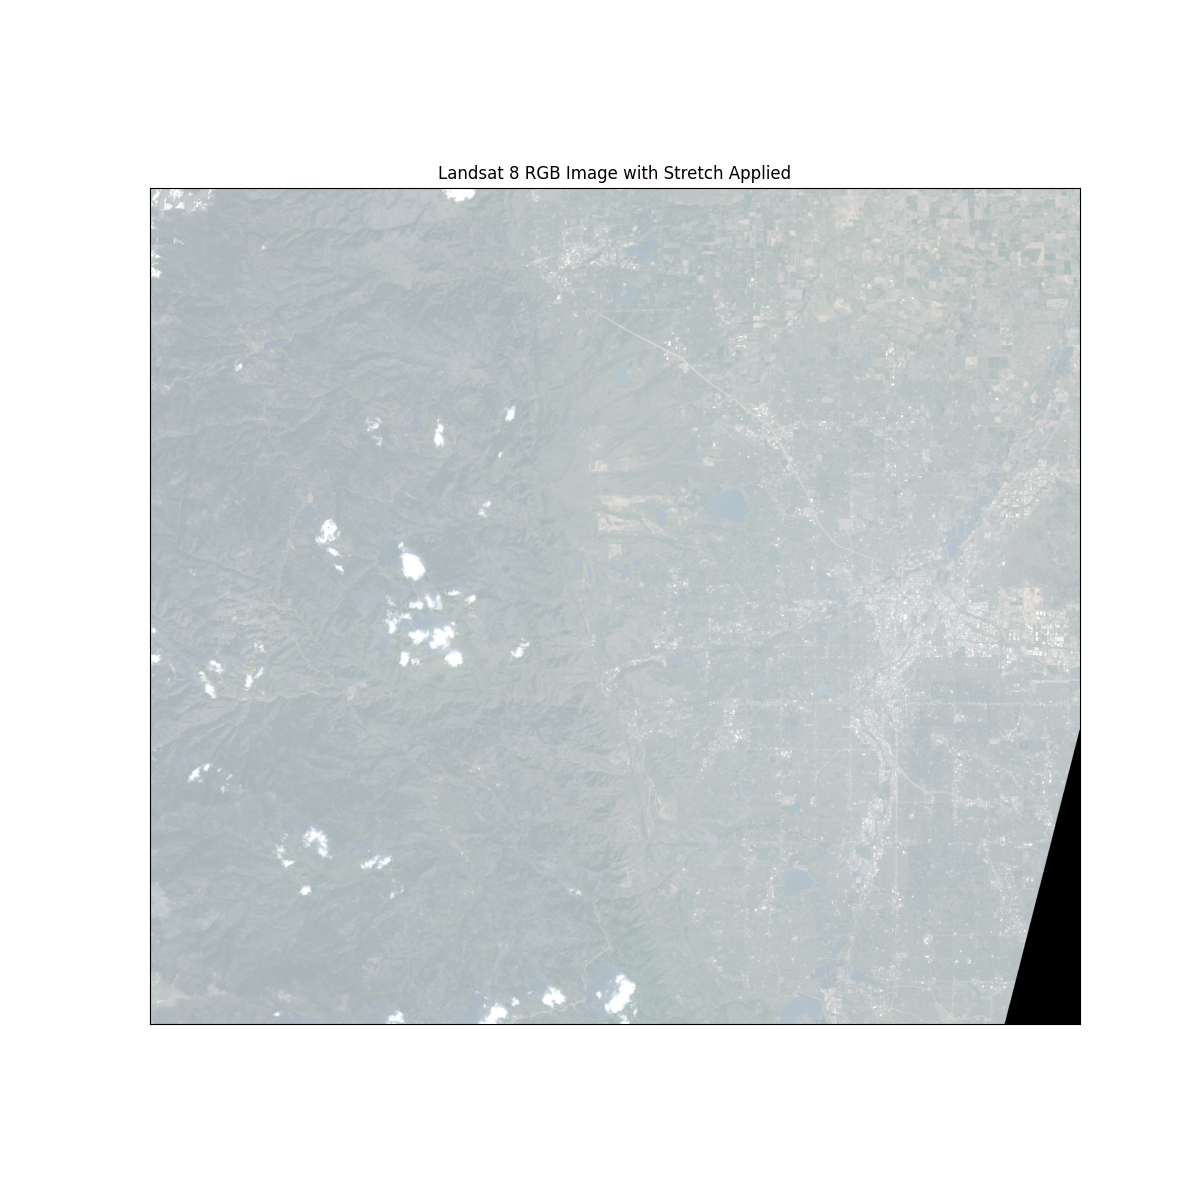 Landsat 8 RGB Image with Stretch Applied